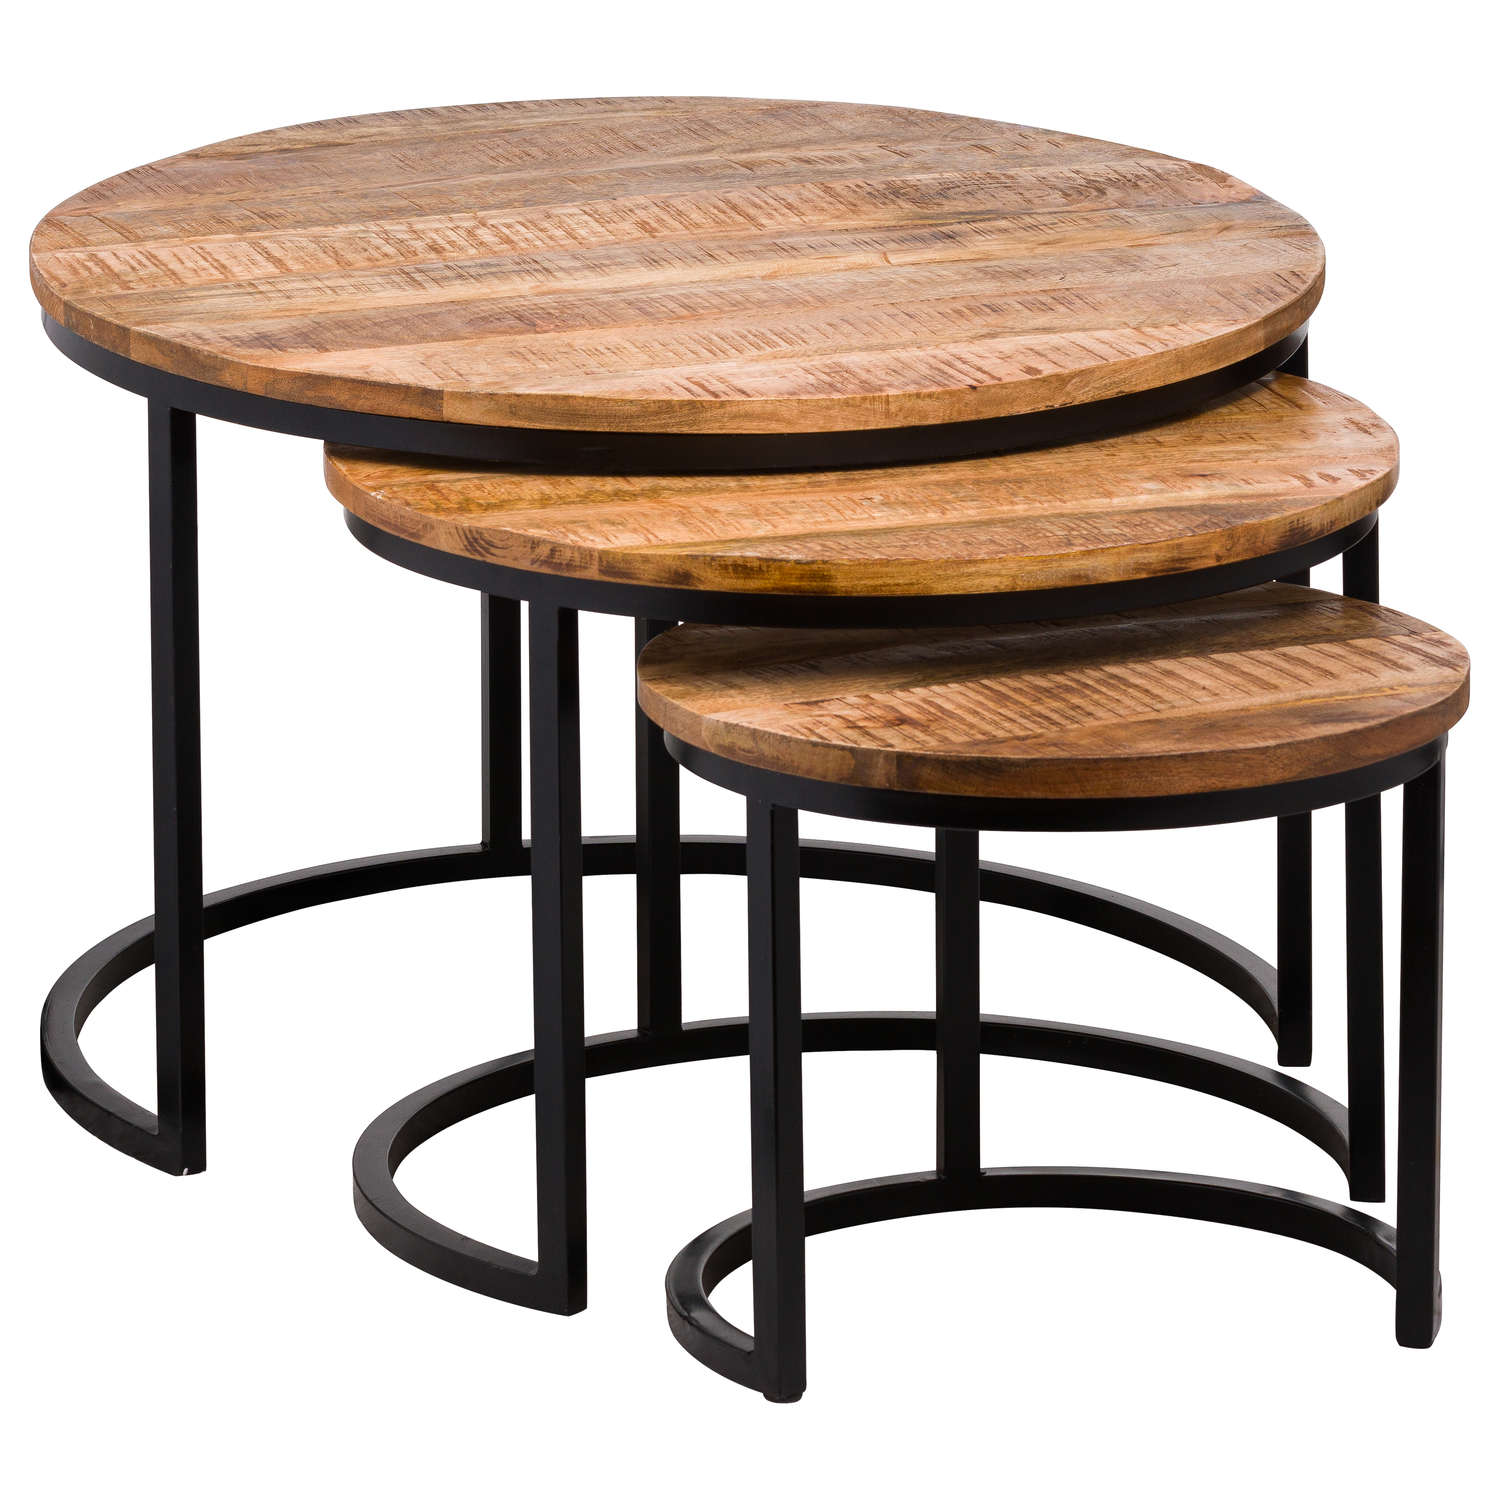 Set Of Three Industrial Tables - Image 1